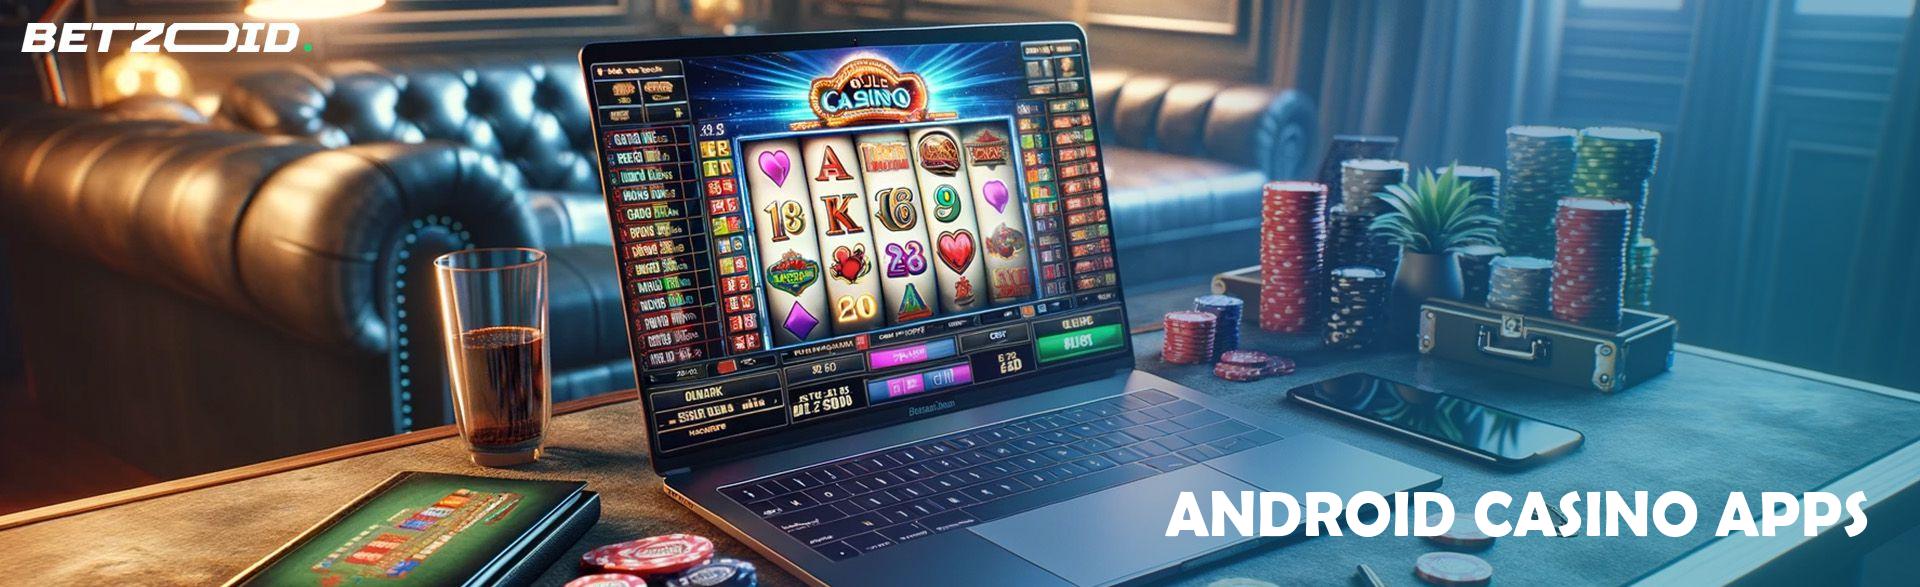 Android Casino Apps.